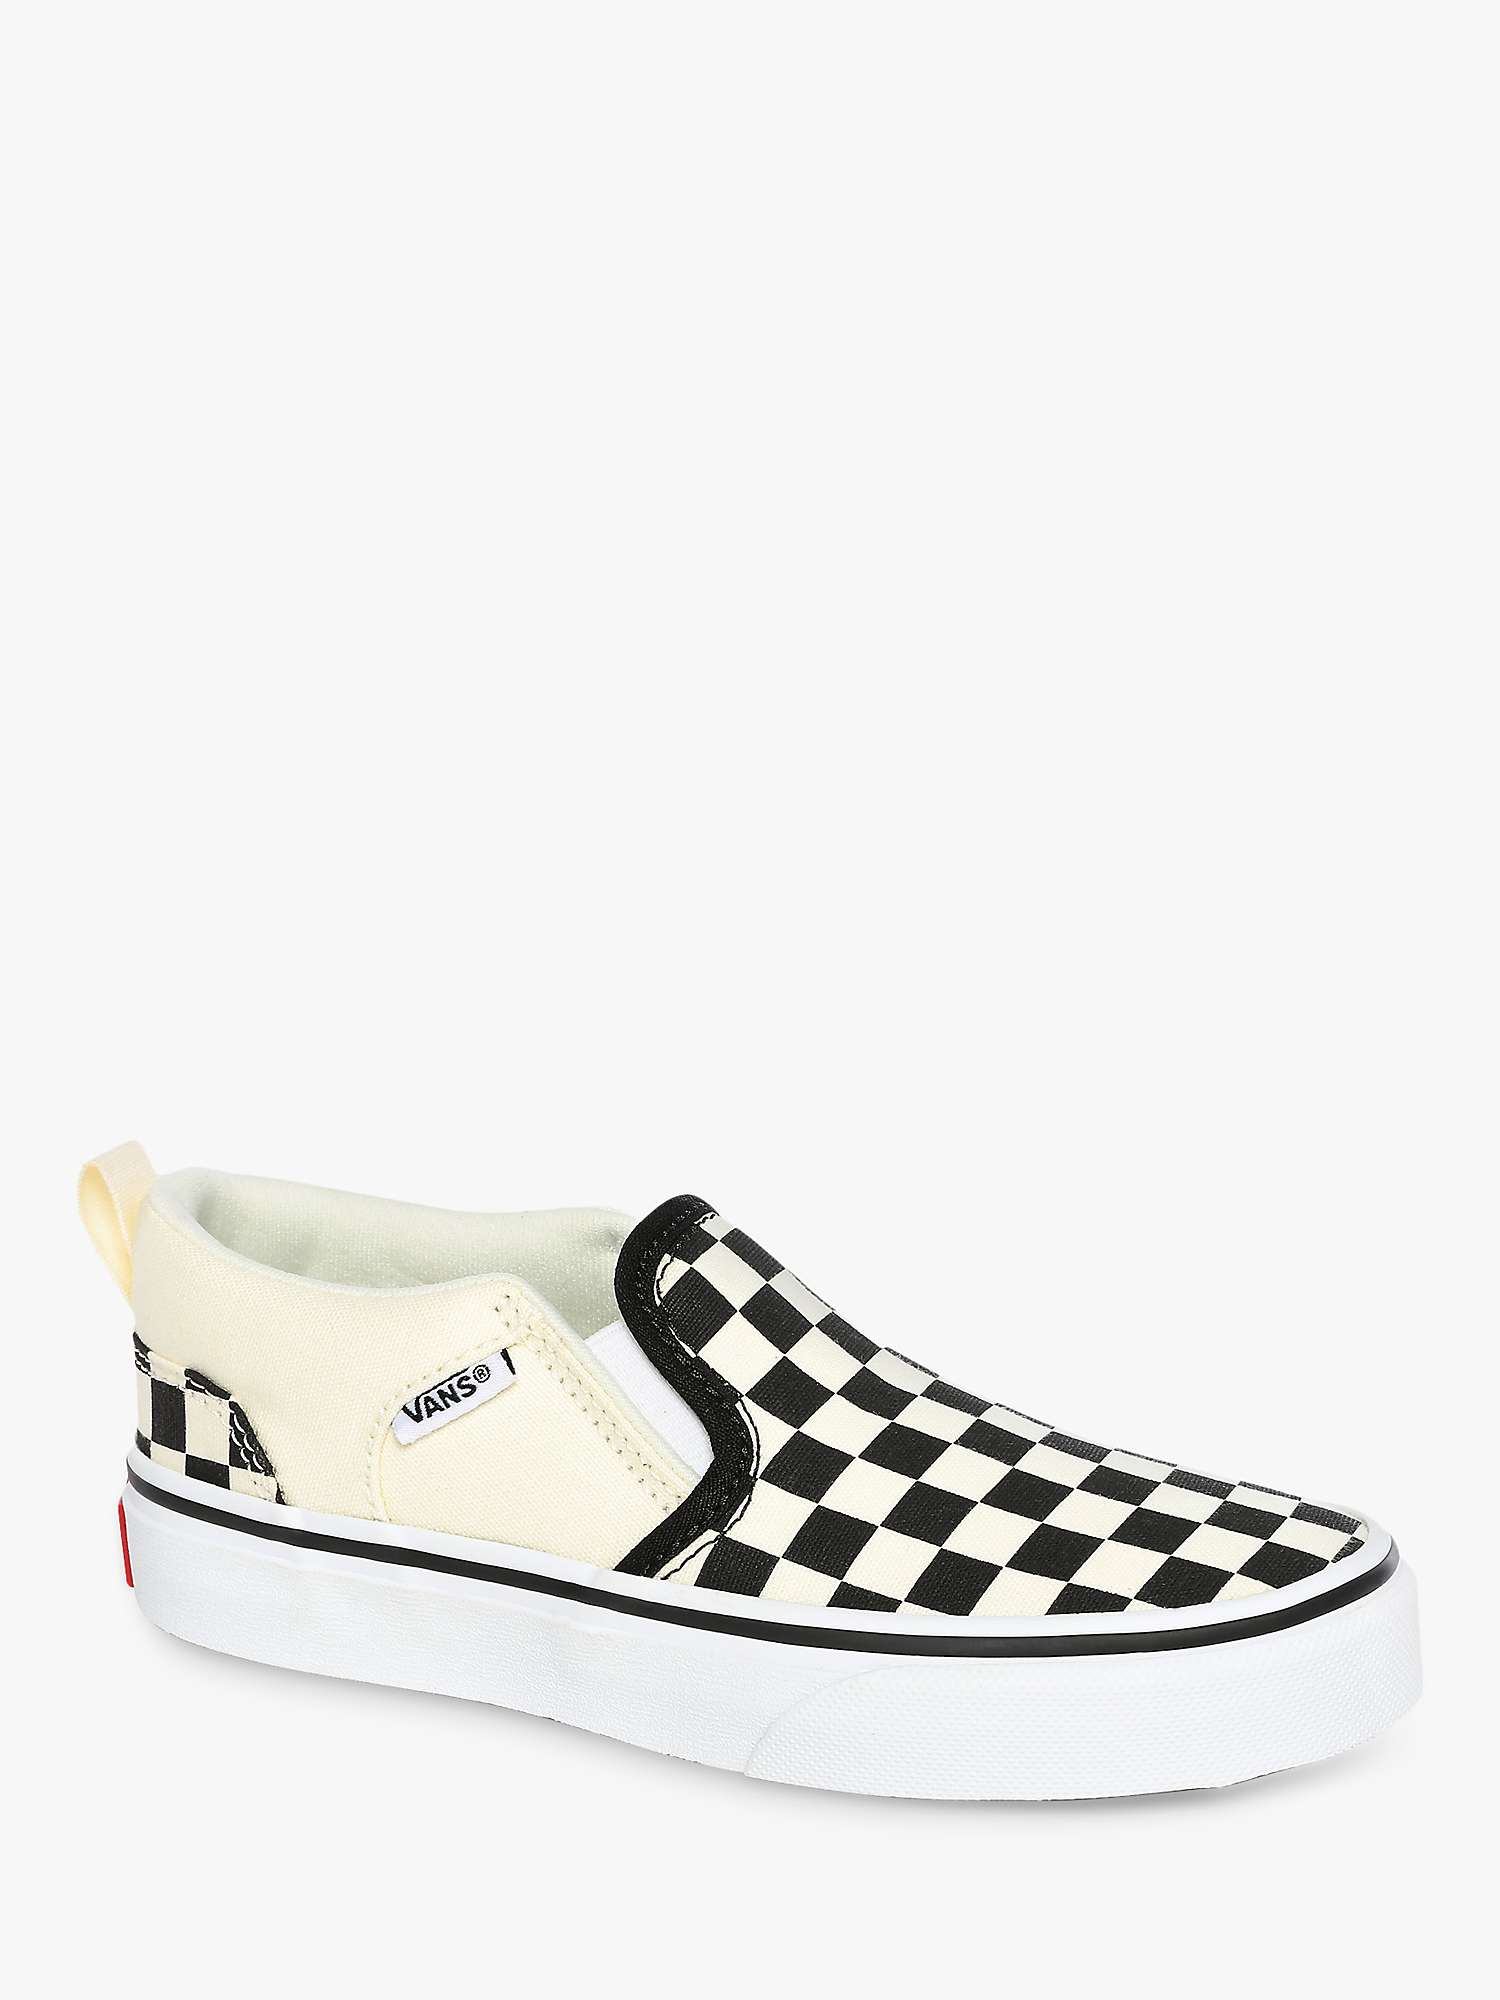 Vans Kids' Asher Slip-On Trainers, Checkers Black at John Lewis & Partners